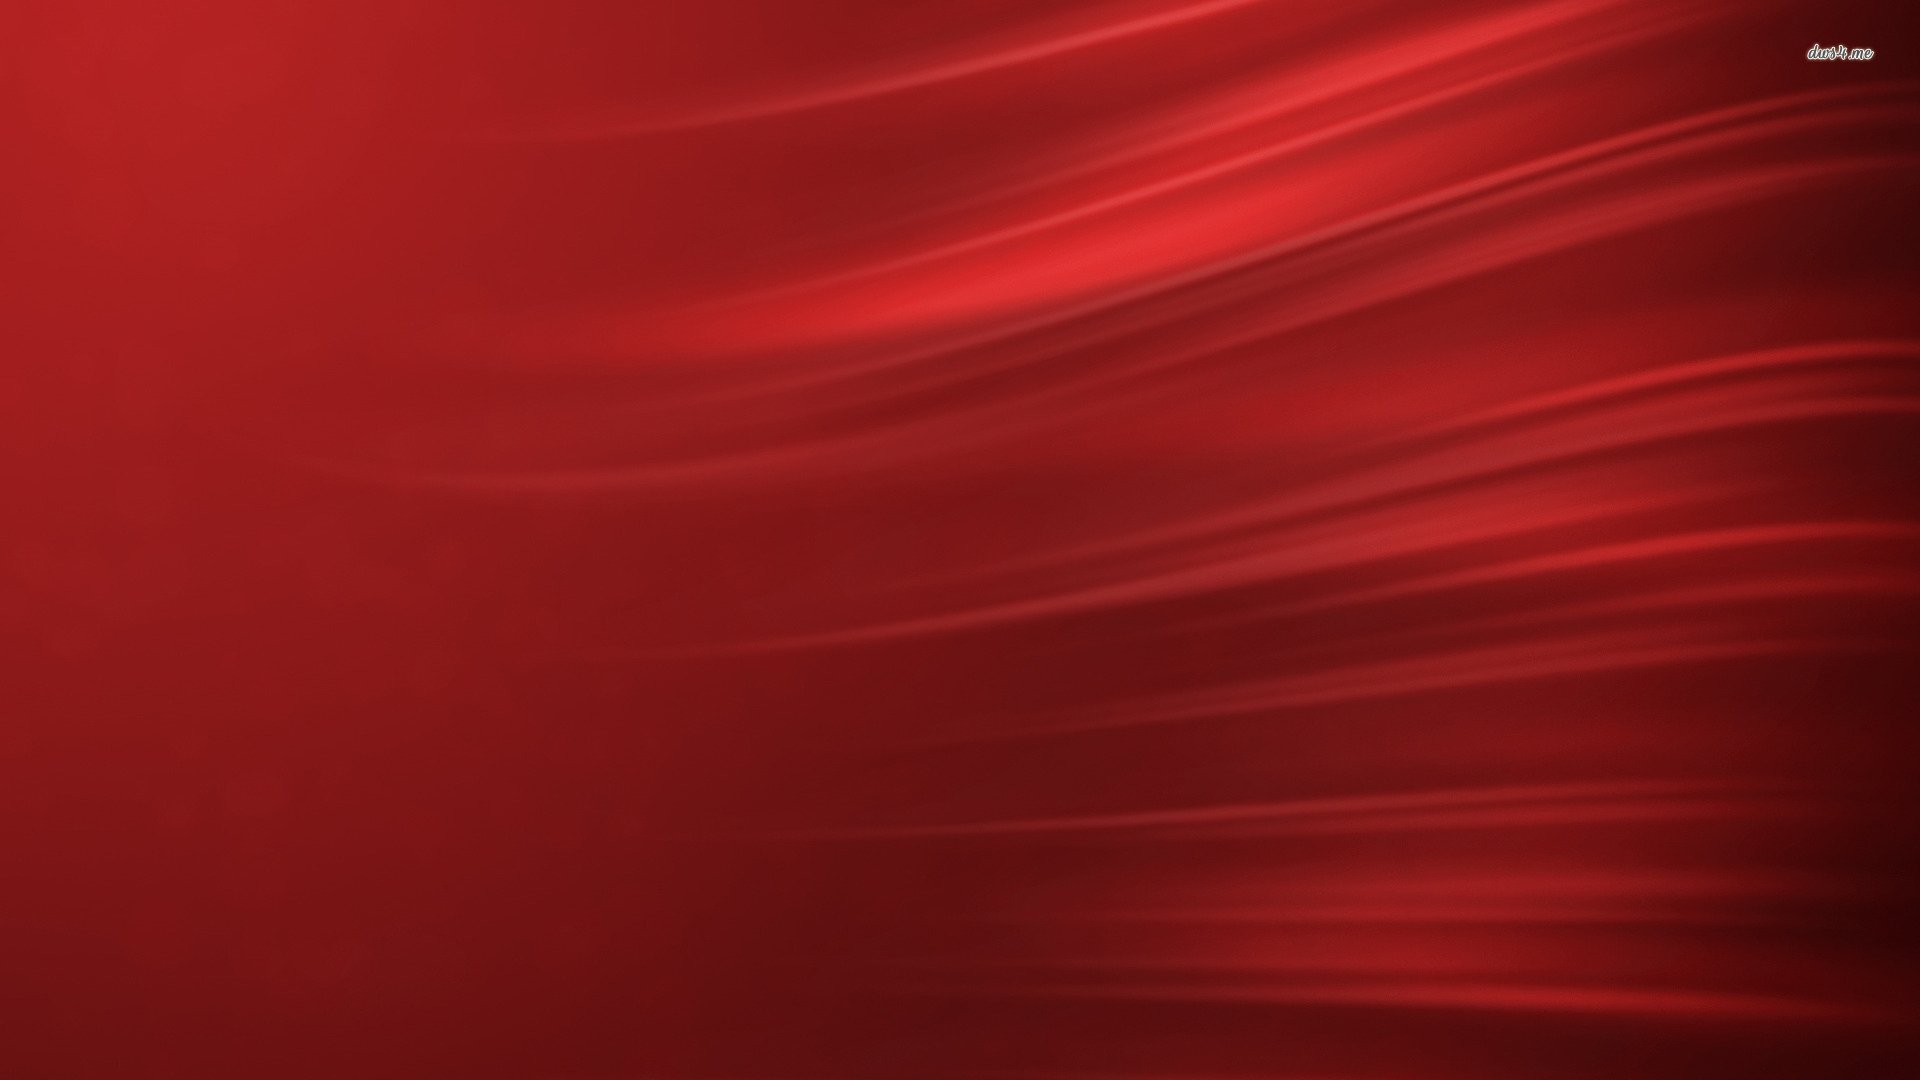 Red Abstract wallpaper 1920x1080 57743 1920x1080